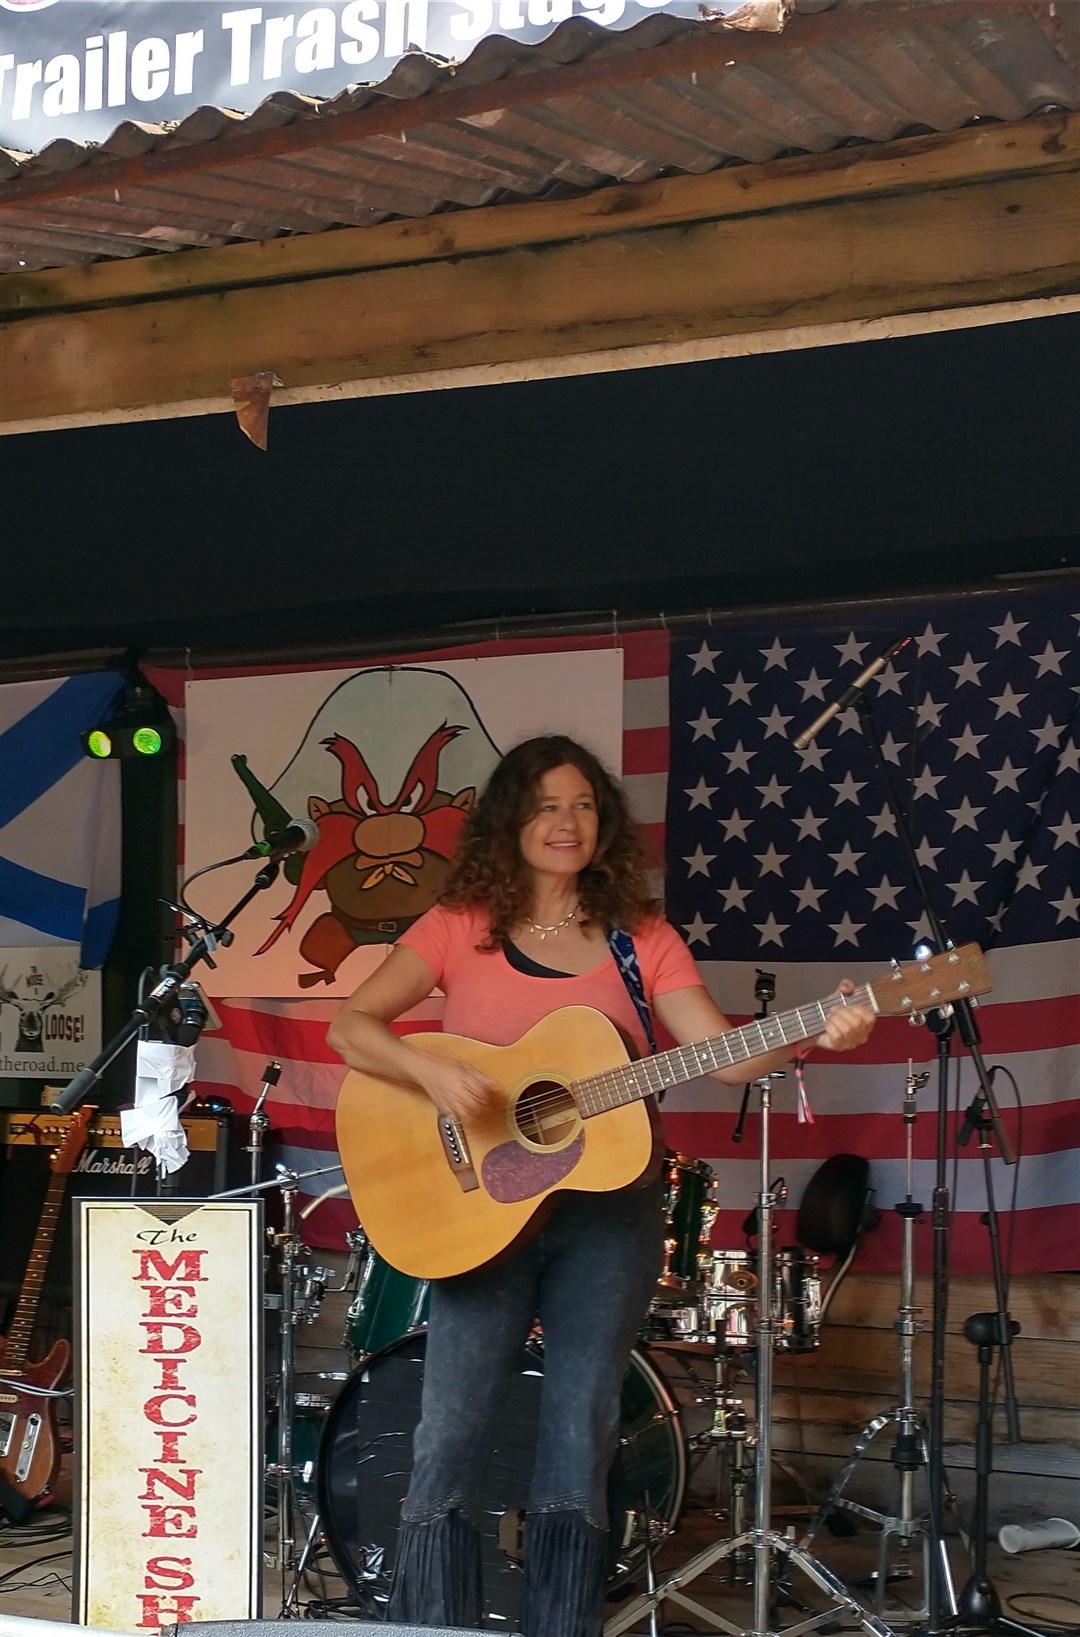 Louise Goffin at the Hootananny Trailer Trash stage.